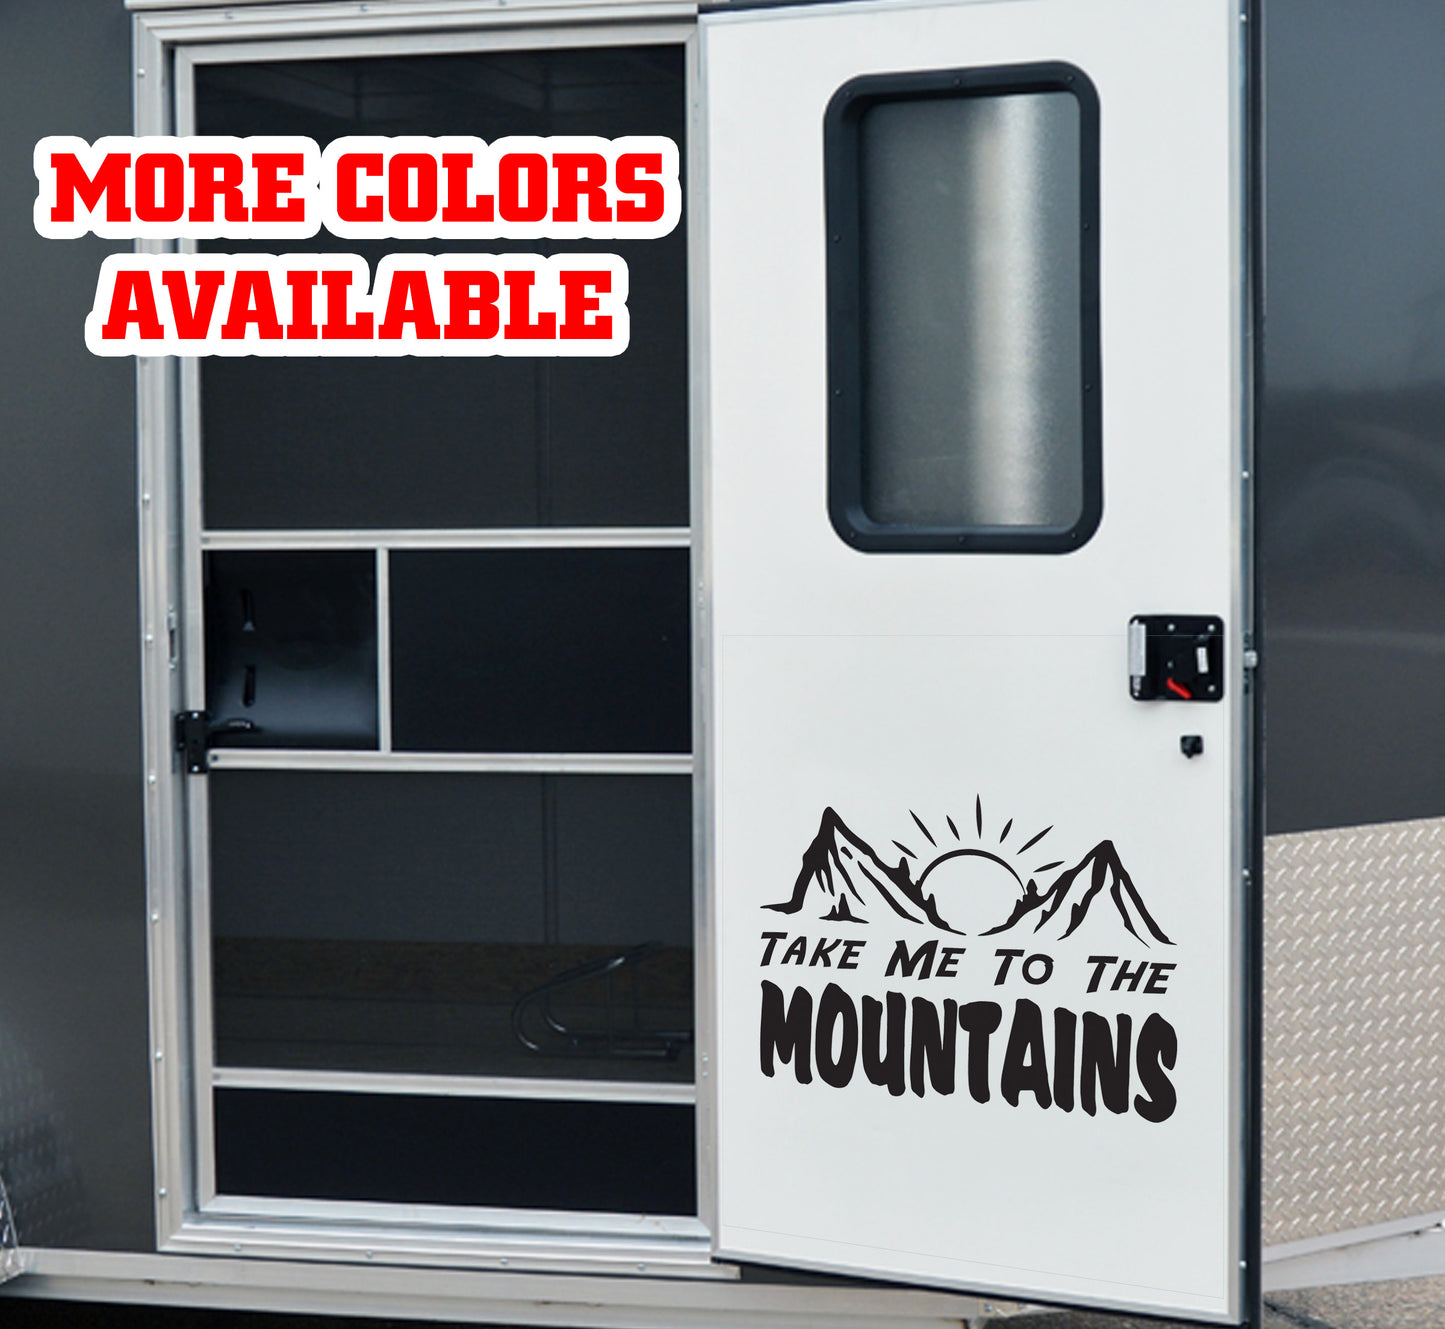 Take me to the mountains camping Vinyl Sticker Decal Graphic | RV Slide Decal RV Door Decal Travel Trailer Camper Truck